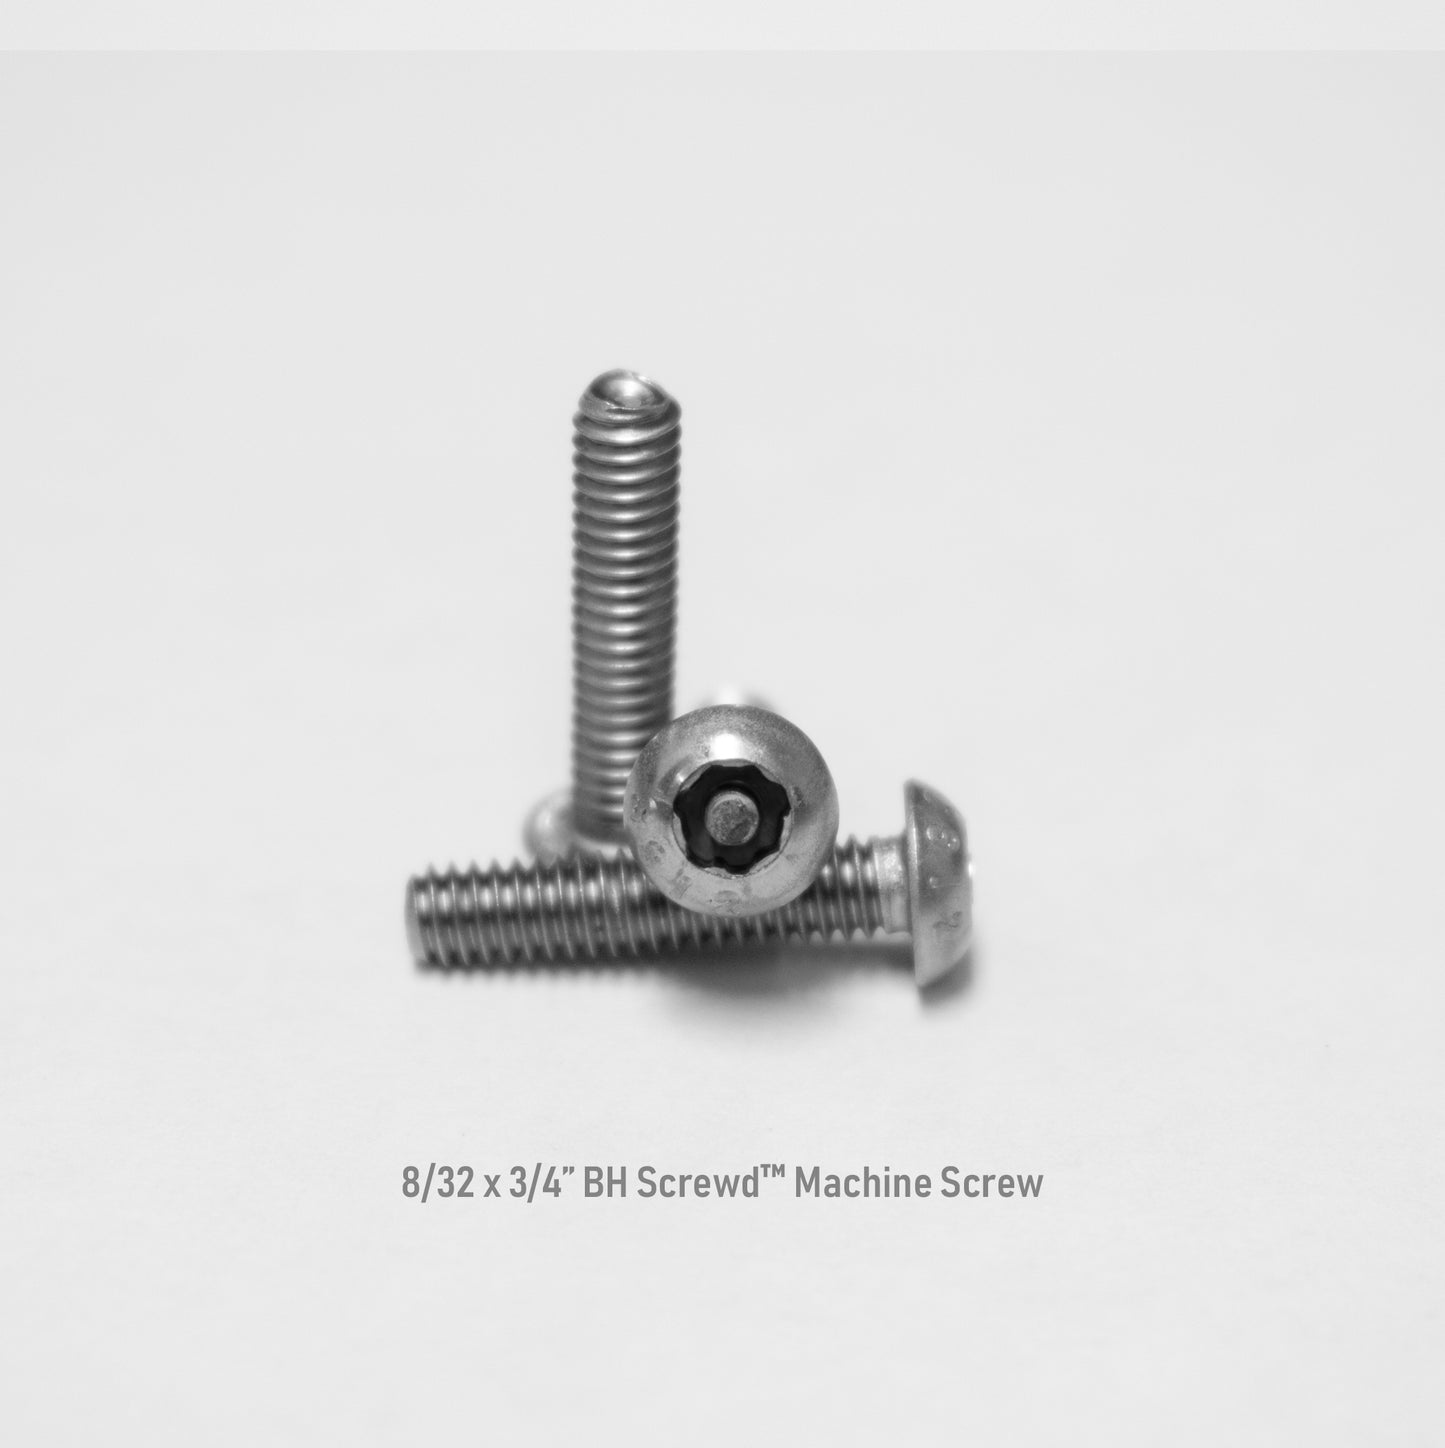 8-32 x 3/4" Button Head Screwd® Security Machine Screw Made out of Stainless Steel